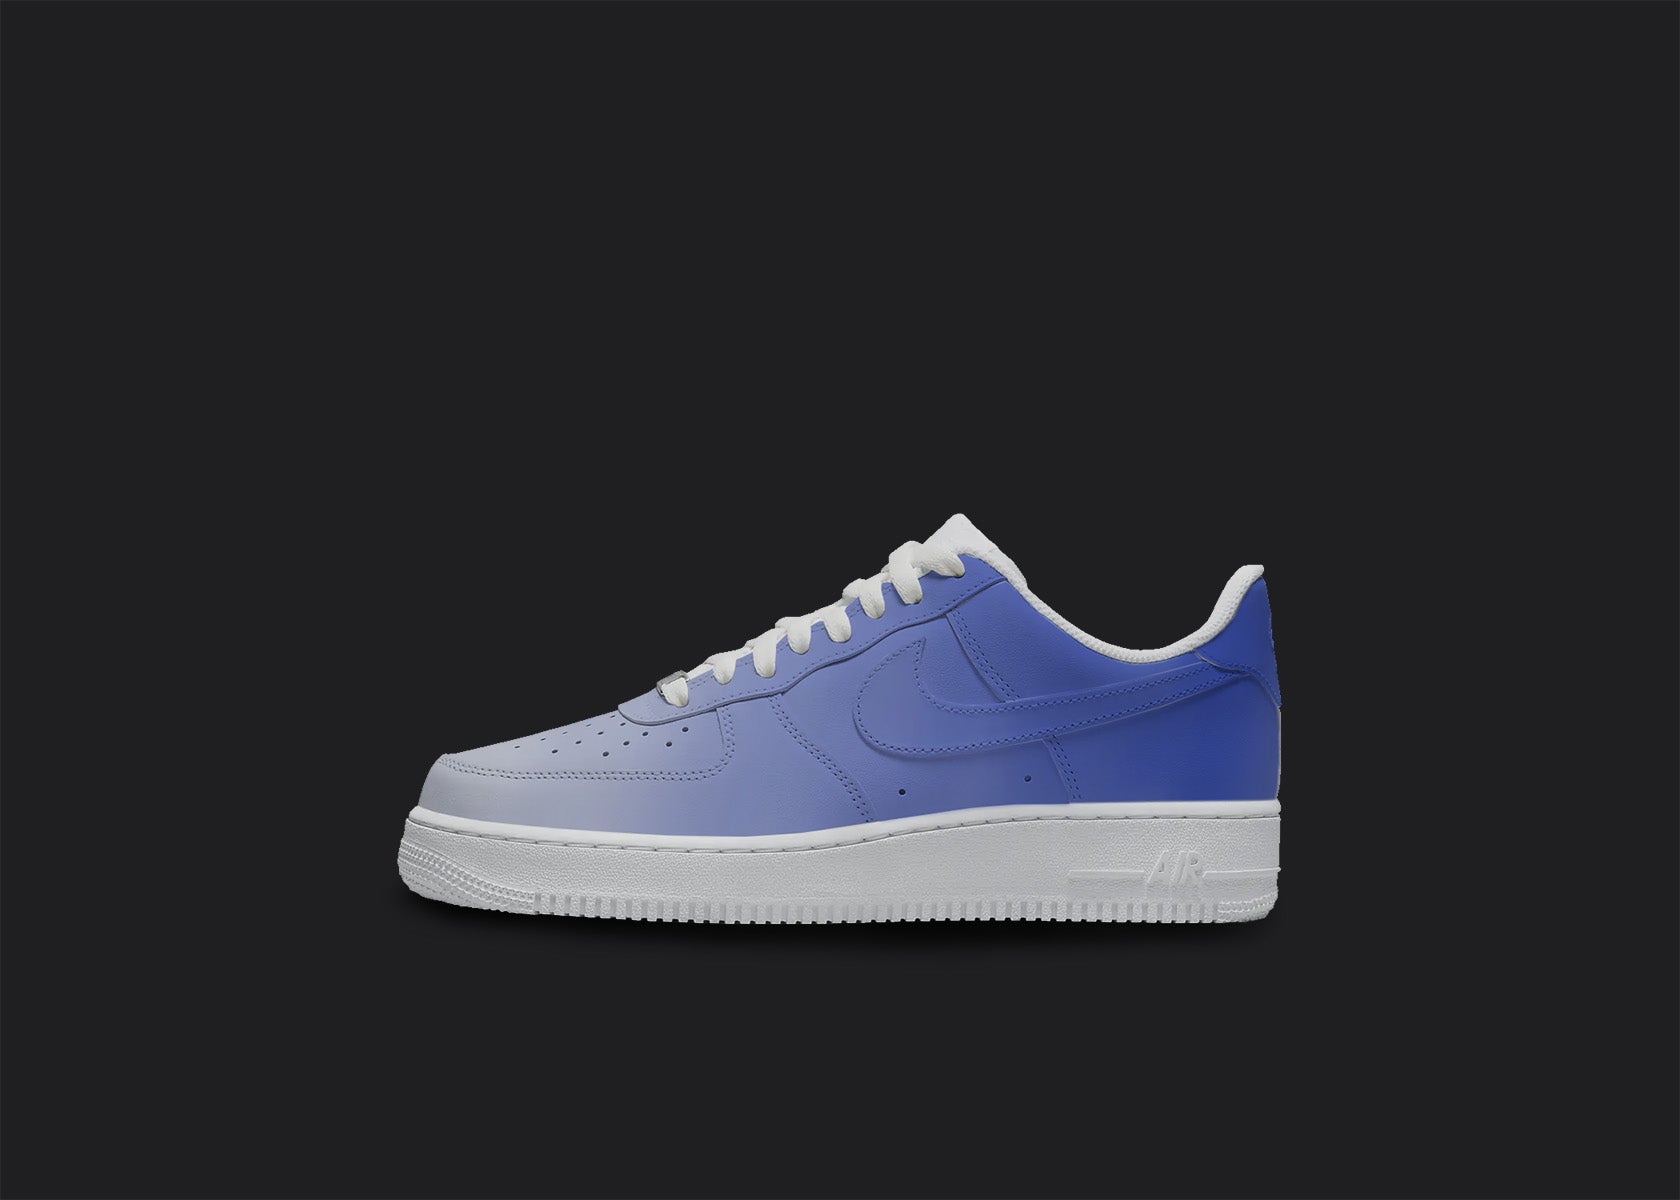 The image is of a Custom Nike Air force 1 sneaker on a blank black background. The white custom sneaker have a blue fade design on the side. 